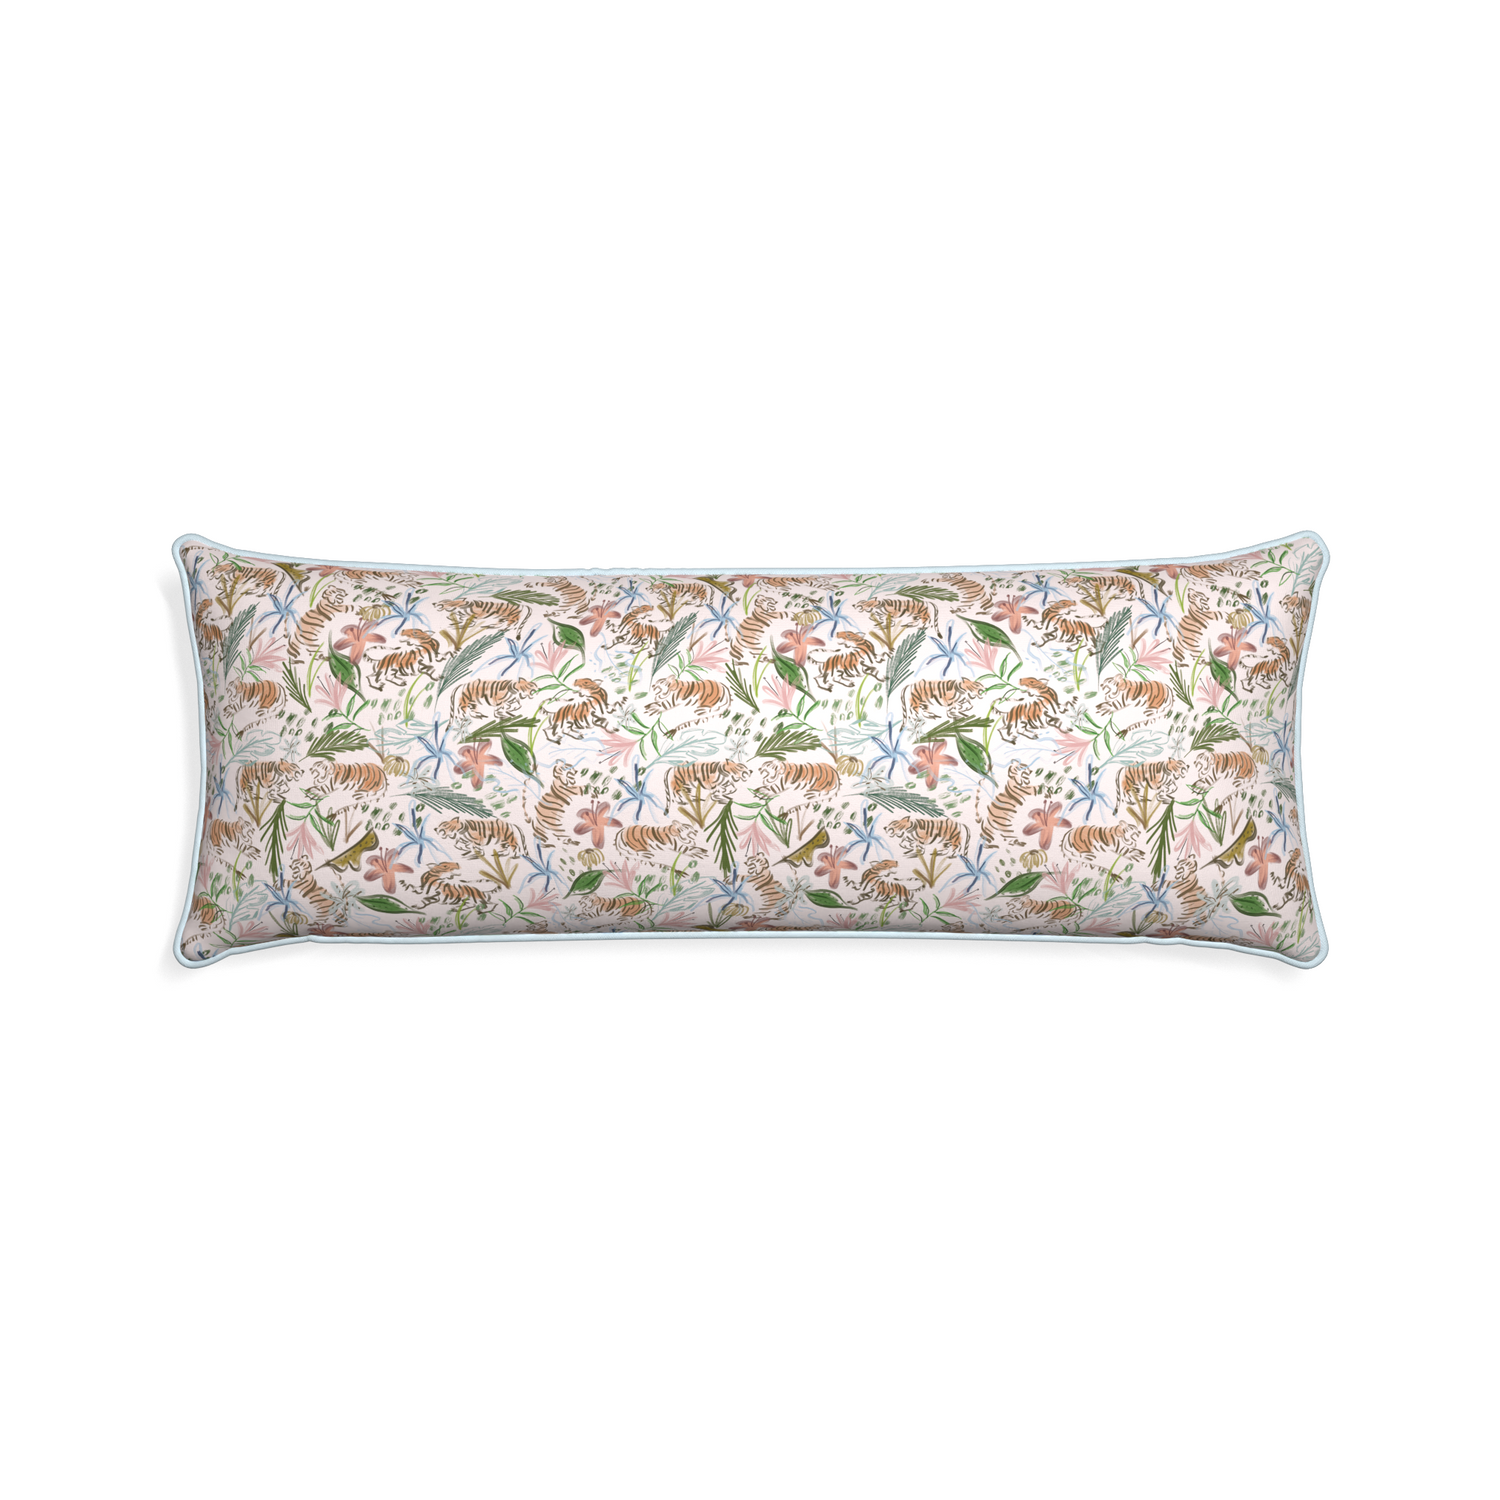 Xl-lumbar frida pink custom pink chinoiserie tigerpillow with powder piping on white background